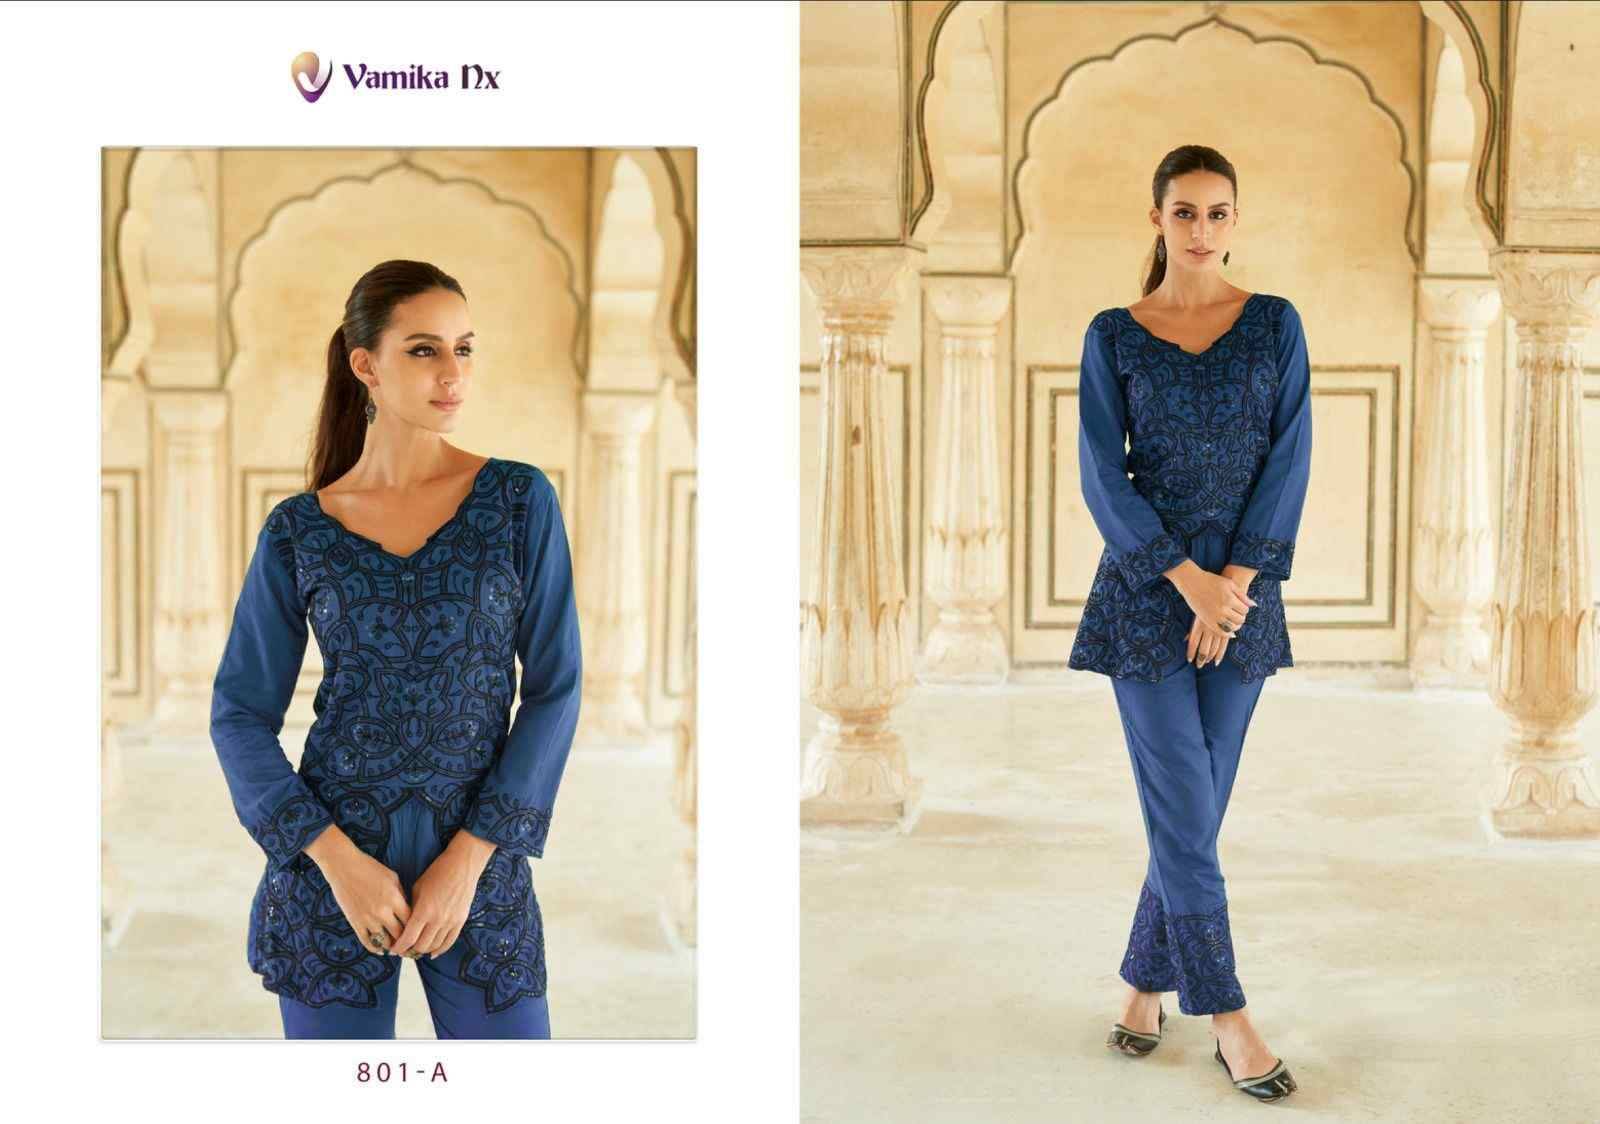 Verona By Vamika 801-A To 801-D Series Designer Stylish Fancy Colorful Beautiful Party Wear & Ethnic Wear Collection Heavy Rayon Co-Ord At Wholesale Price